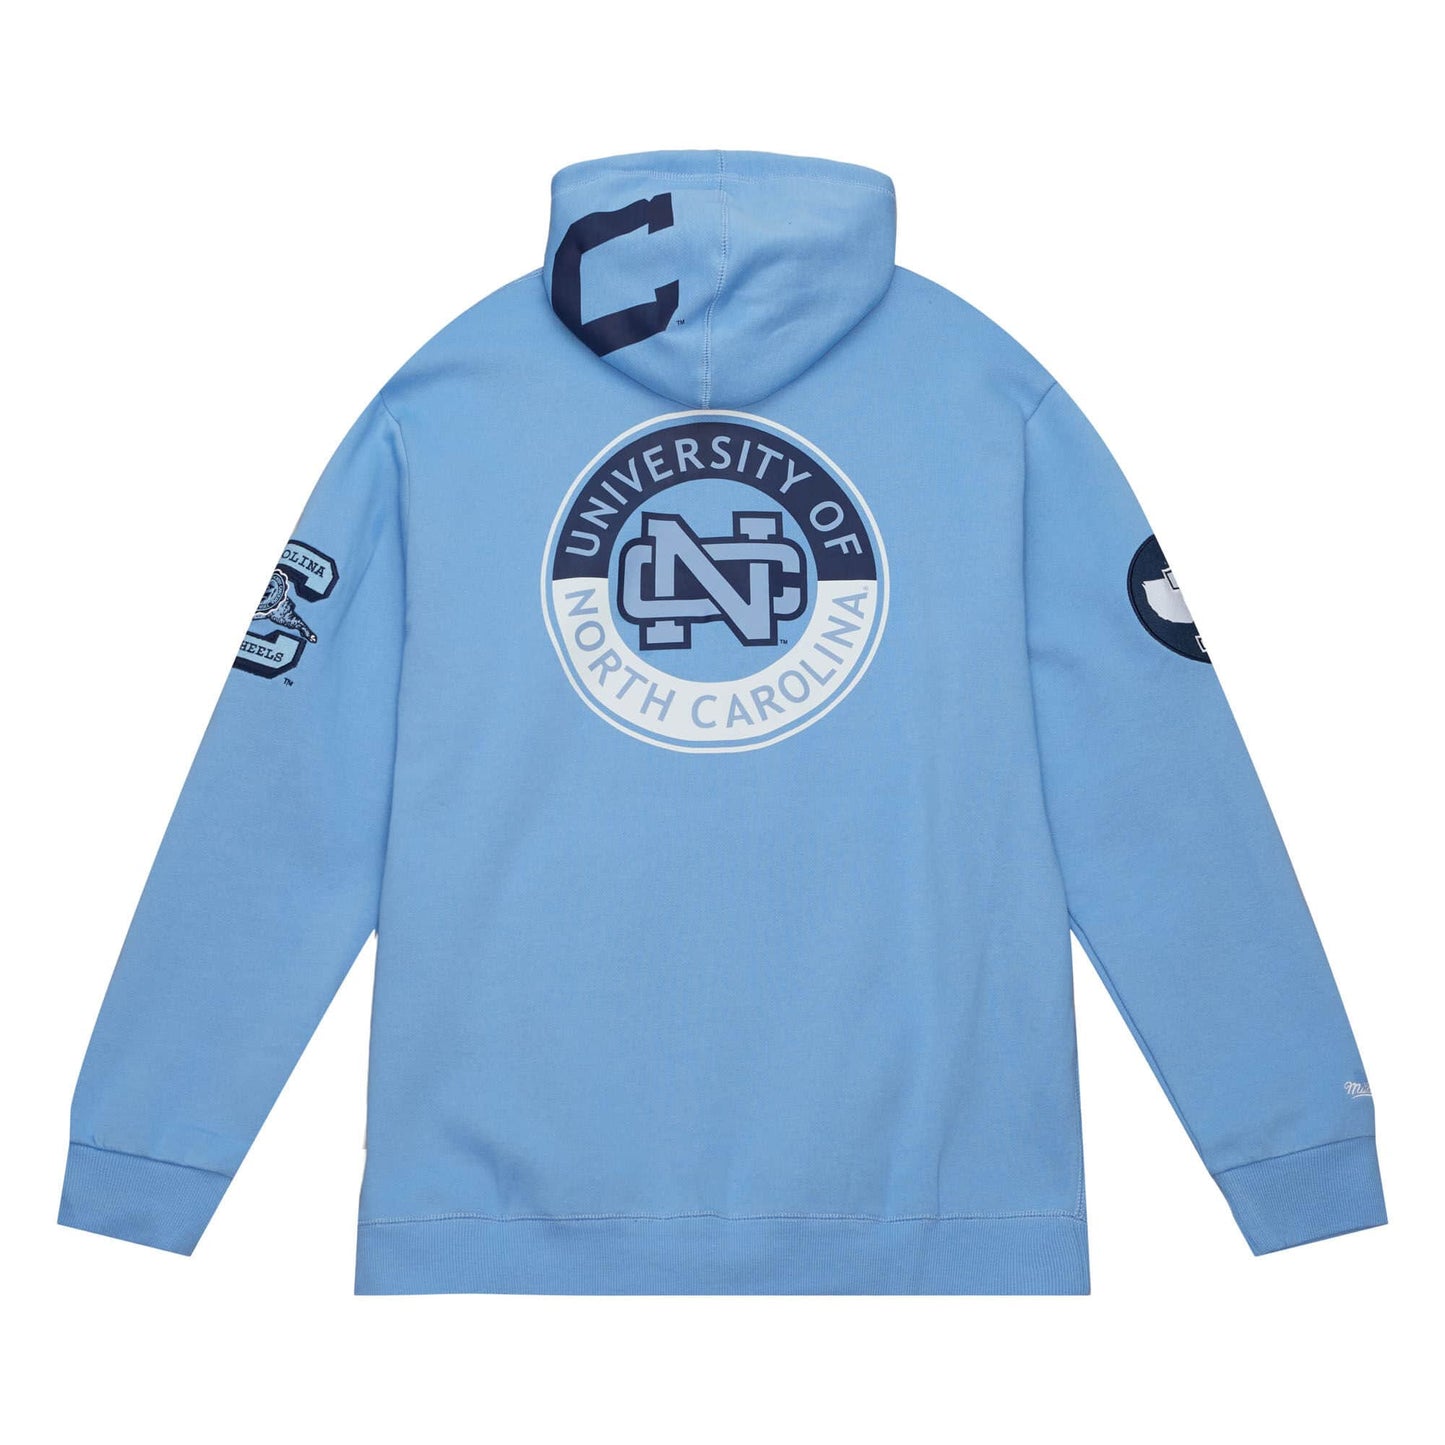 Mitchell & Ness City Collection Hoodie - UNC